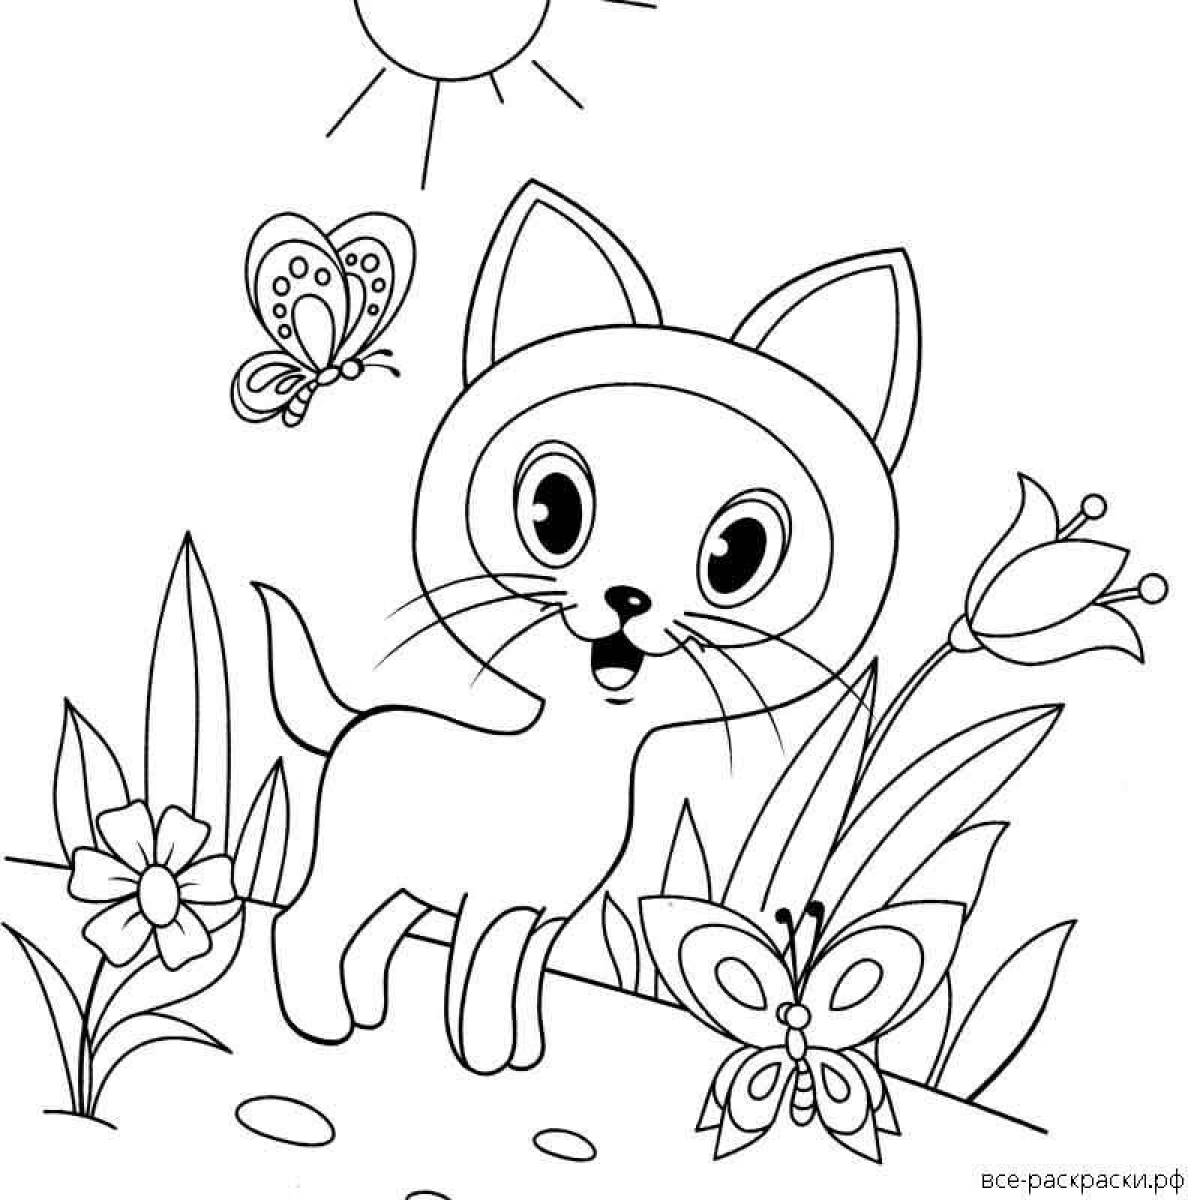 Peppy kitten coloring page